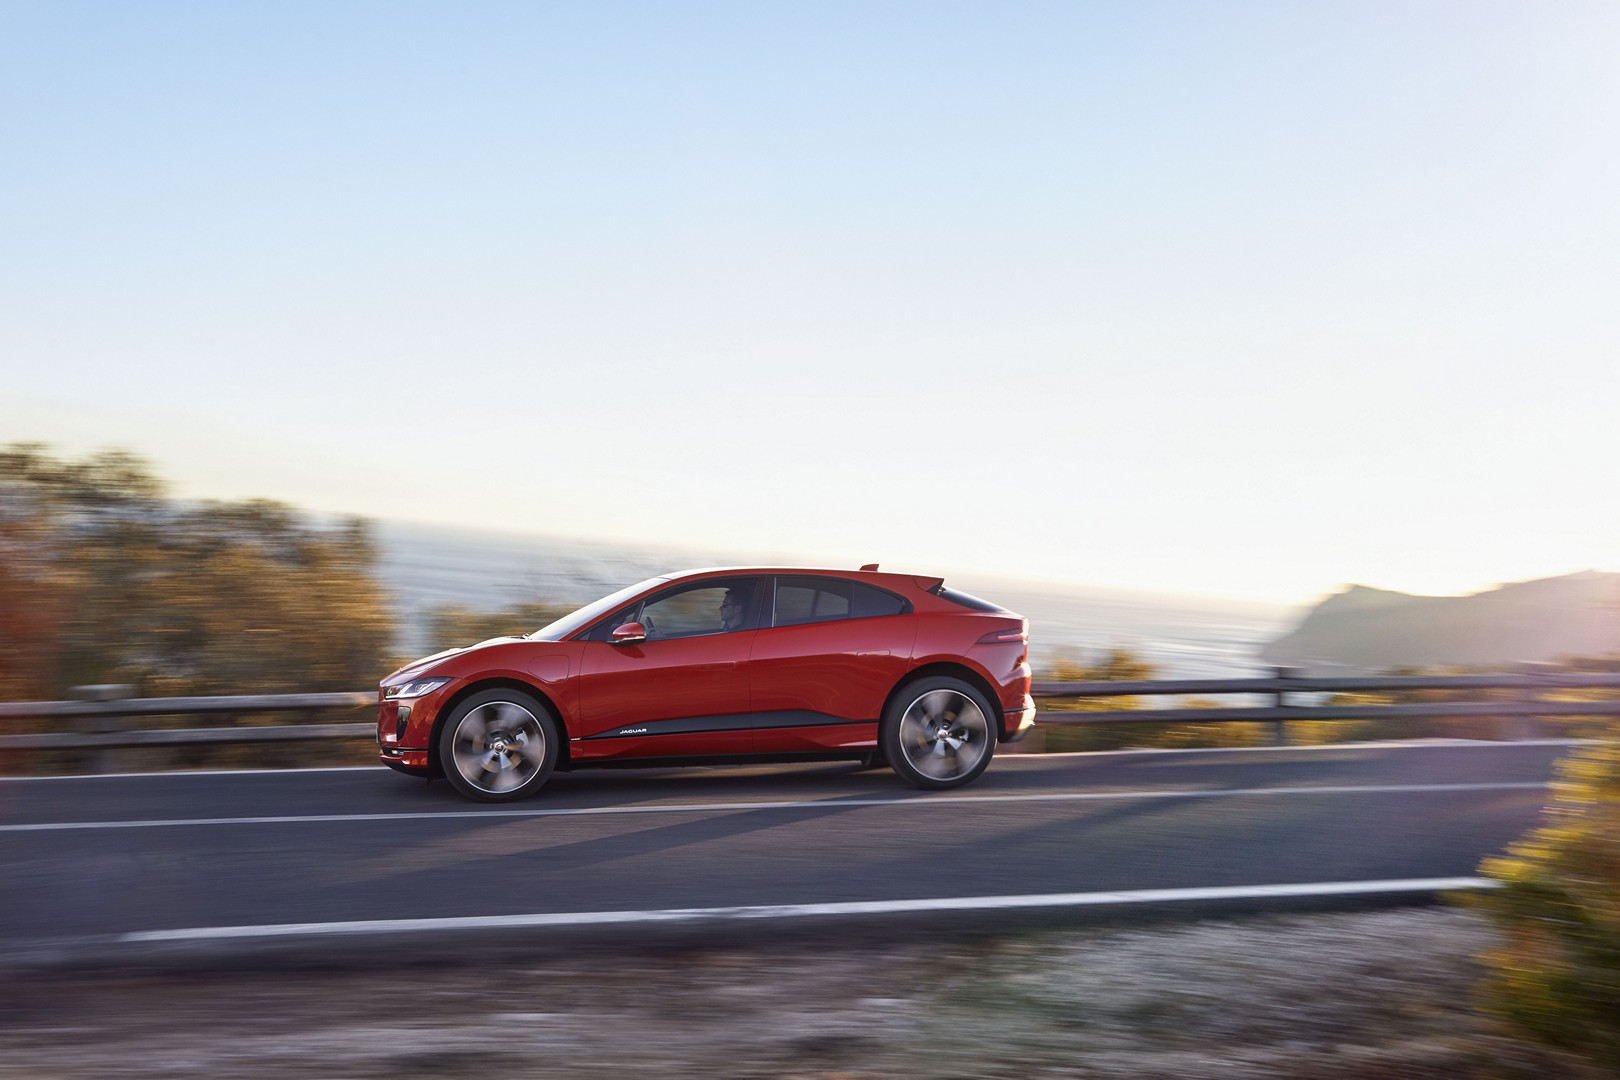 https://s1.cdn.autoevolution.com/images/news/gallery/2020-jaguar-i-pace-update-offers-234-miles-of-range-thanks-to-etrophy-know-how_64.jpg